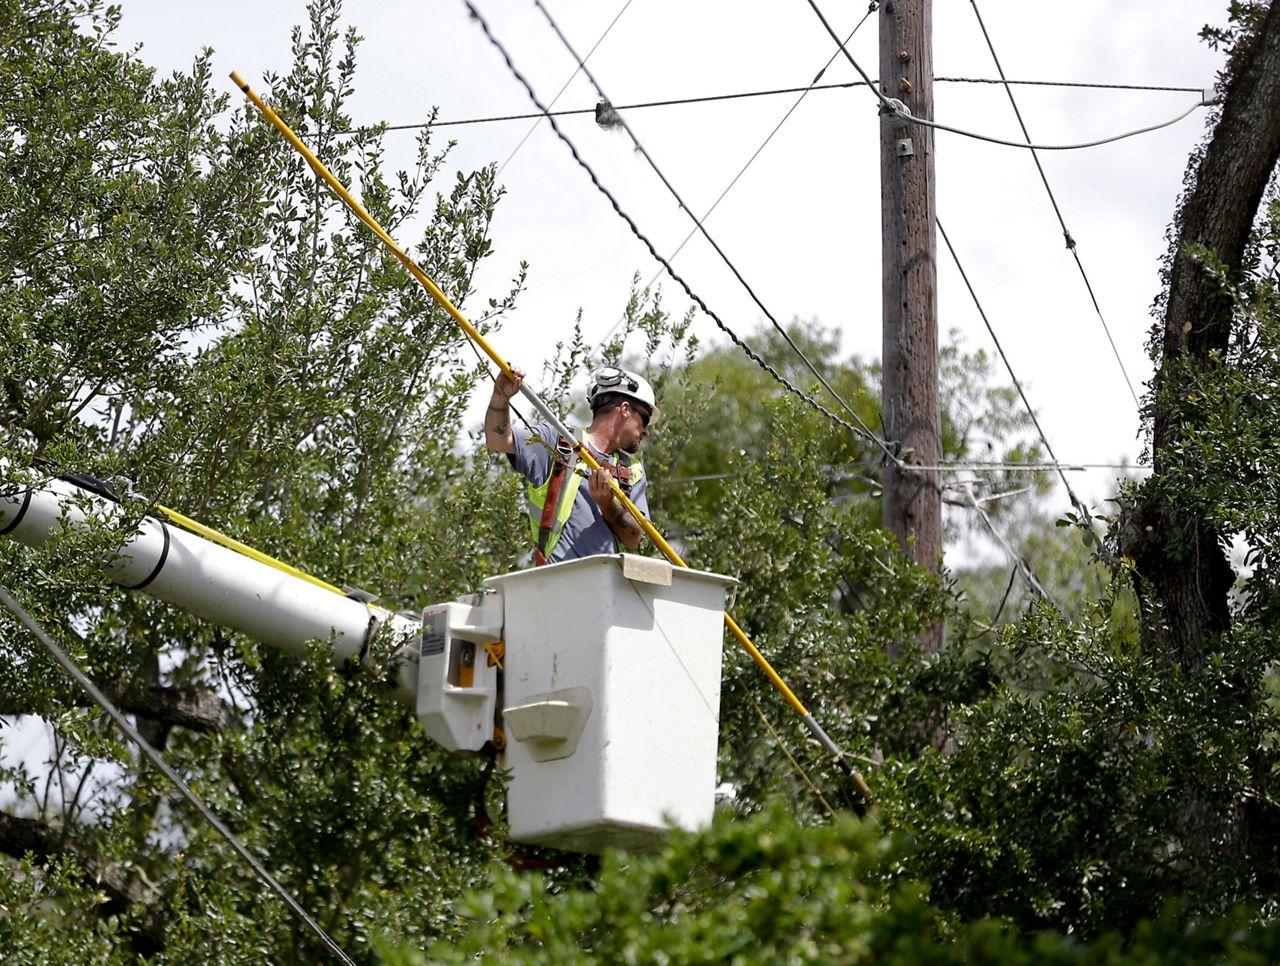 A power company employee worked to restore power following Hurricane Irma.  Photo by the Associated Press.